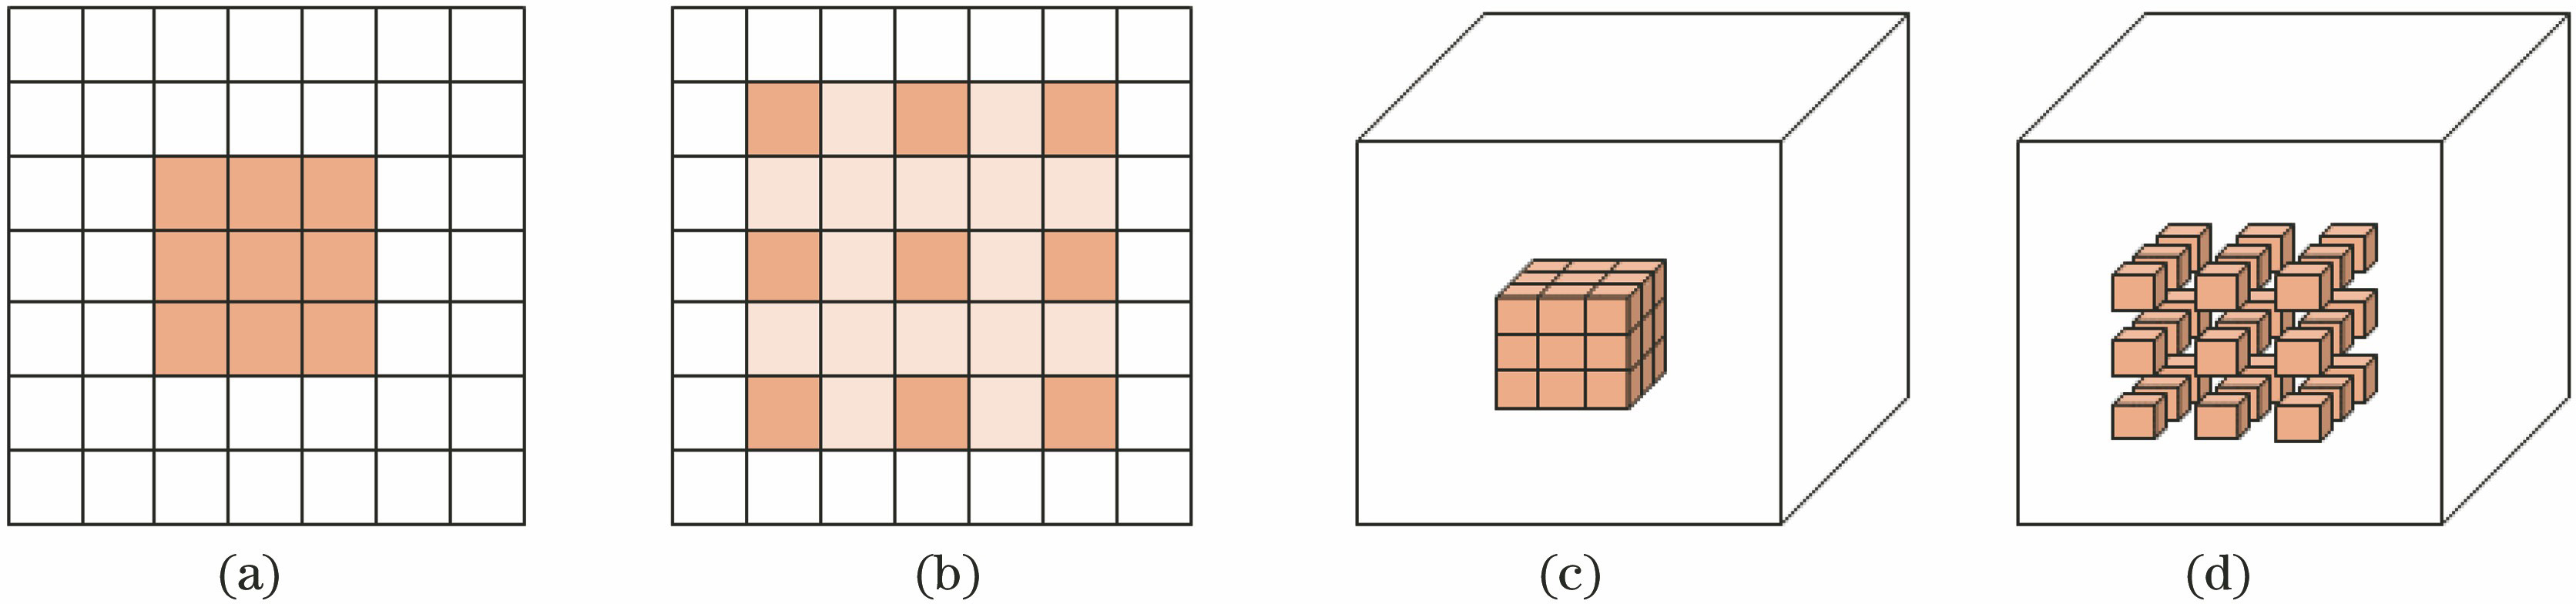 Schematic of standard convolution and dilated convolution. (a) 2D standard convolution; (b) 2D dilated convolution (r=2,2); (c) 3D standard convolution; (d) 3D dilated convolution (r=2,2,2)